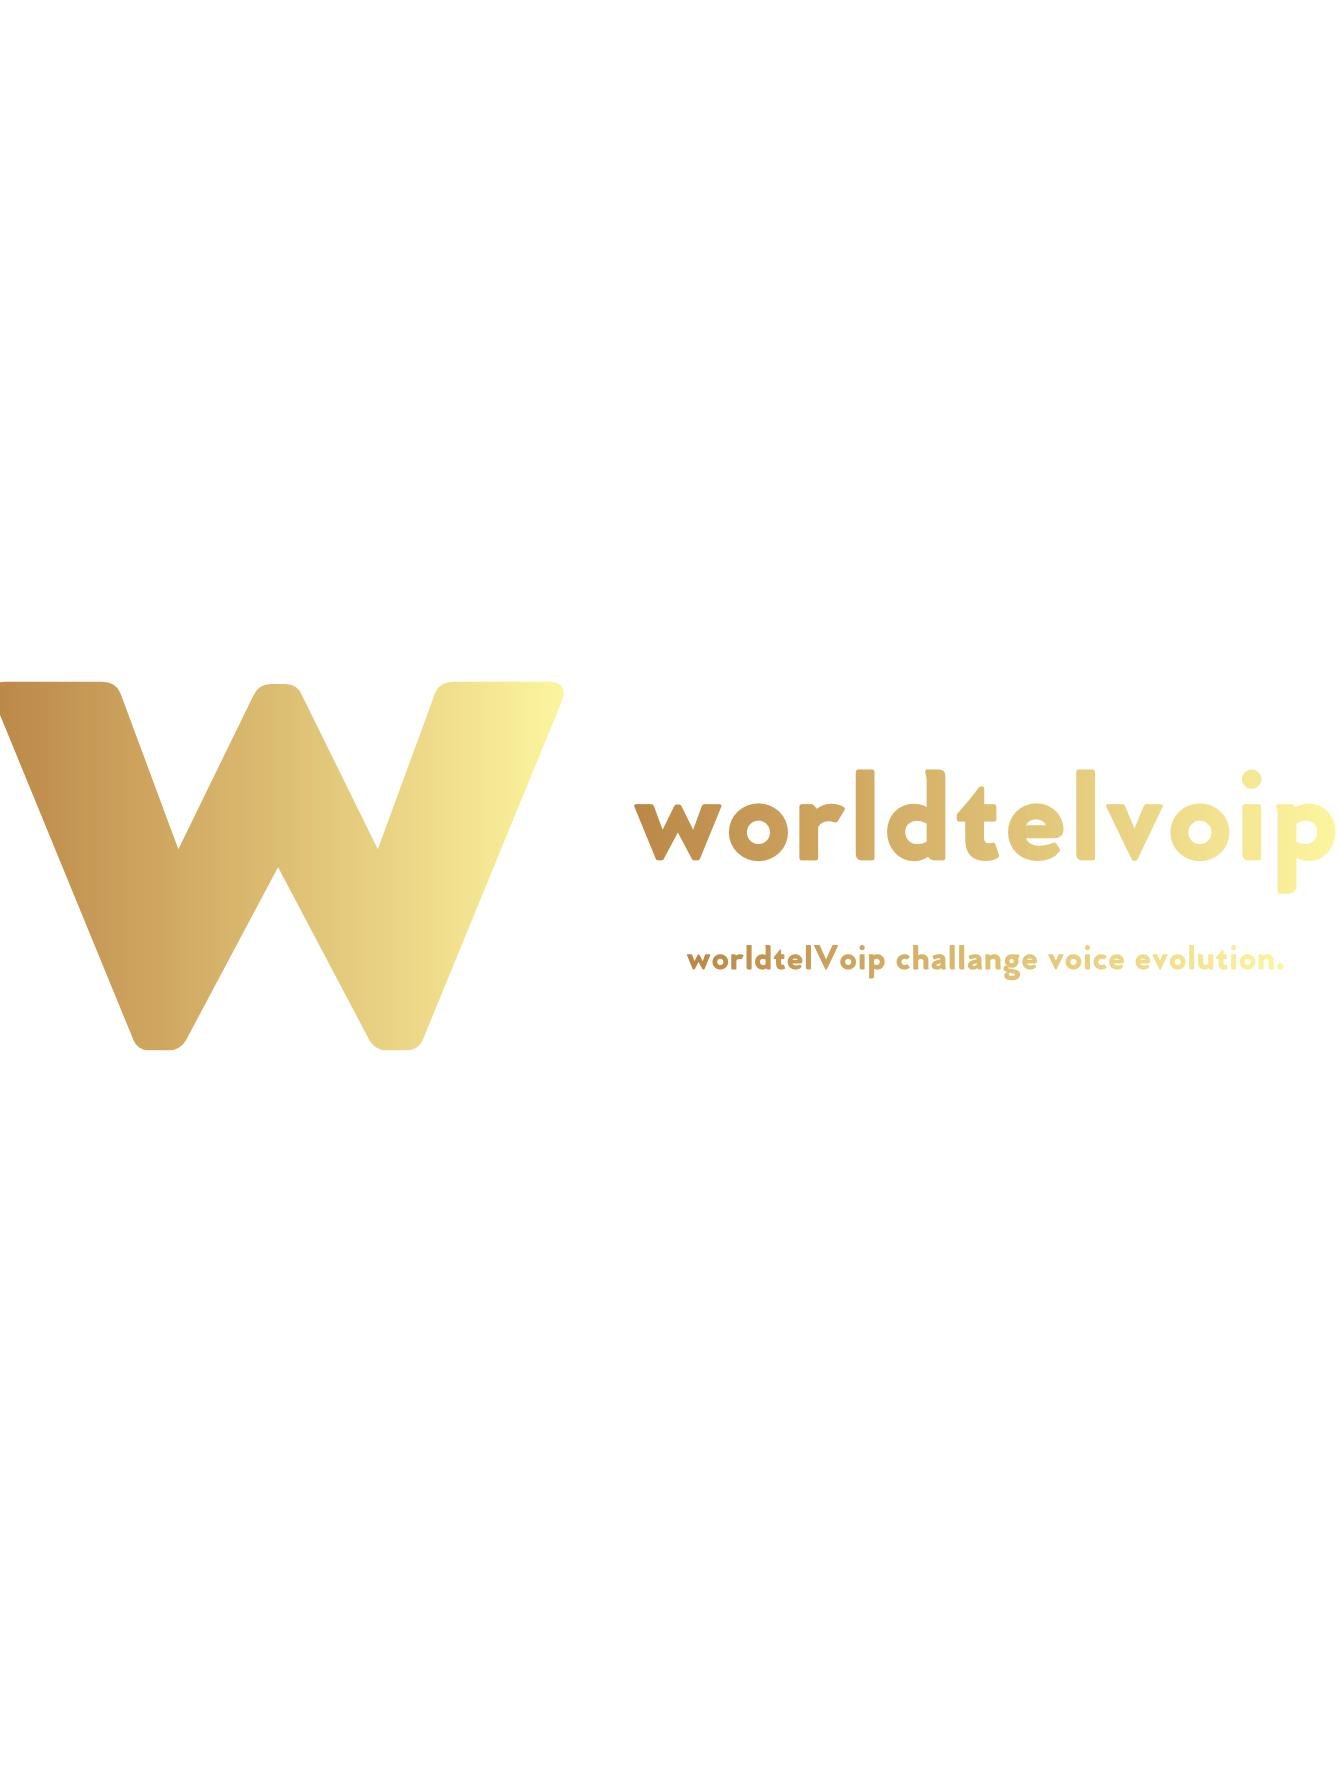 We Sell A-Z VoIP Services, worldtelVoIP is BD based VoIP leading company focused on the market A-Z termination sell & buy. 
https://t.co/ZK4l9RriSu